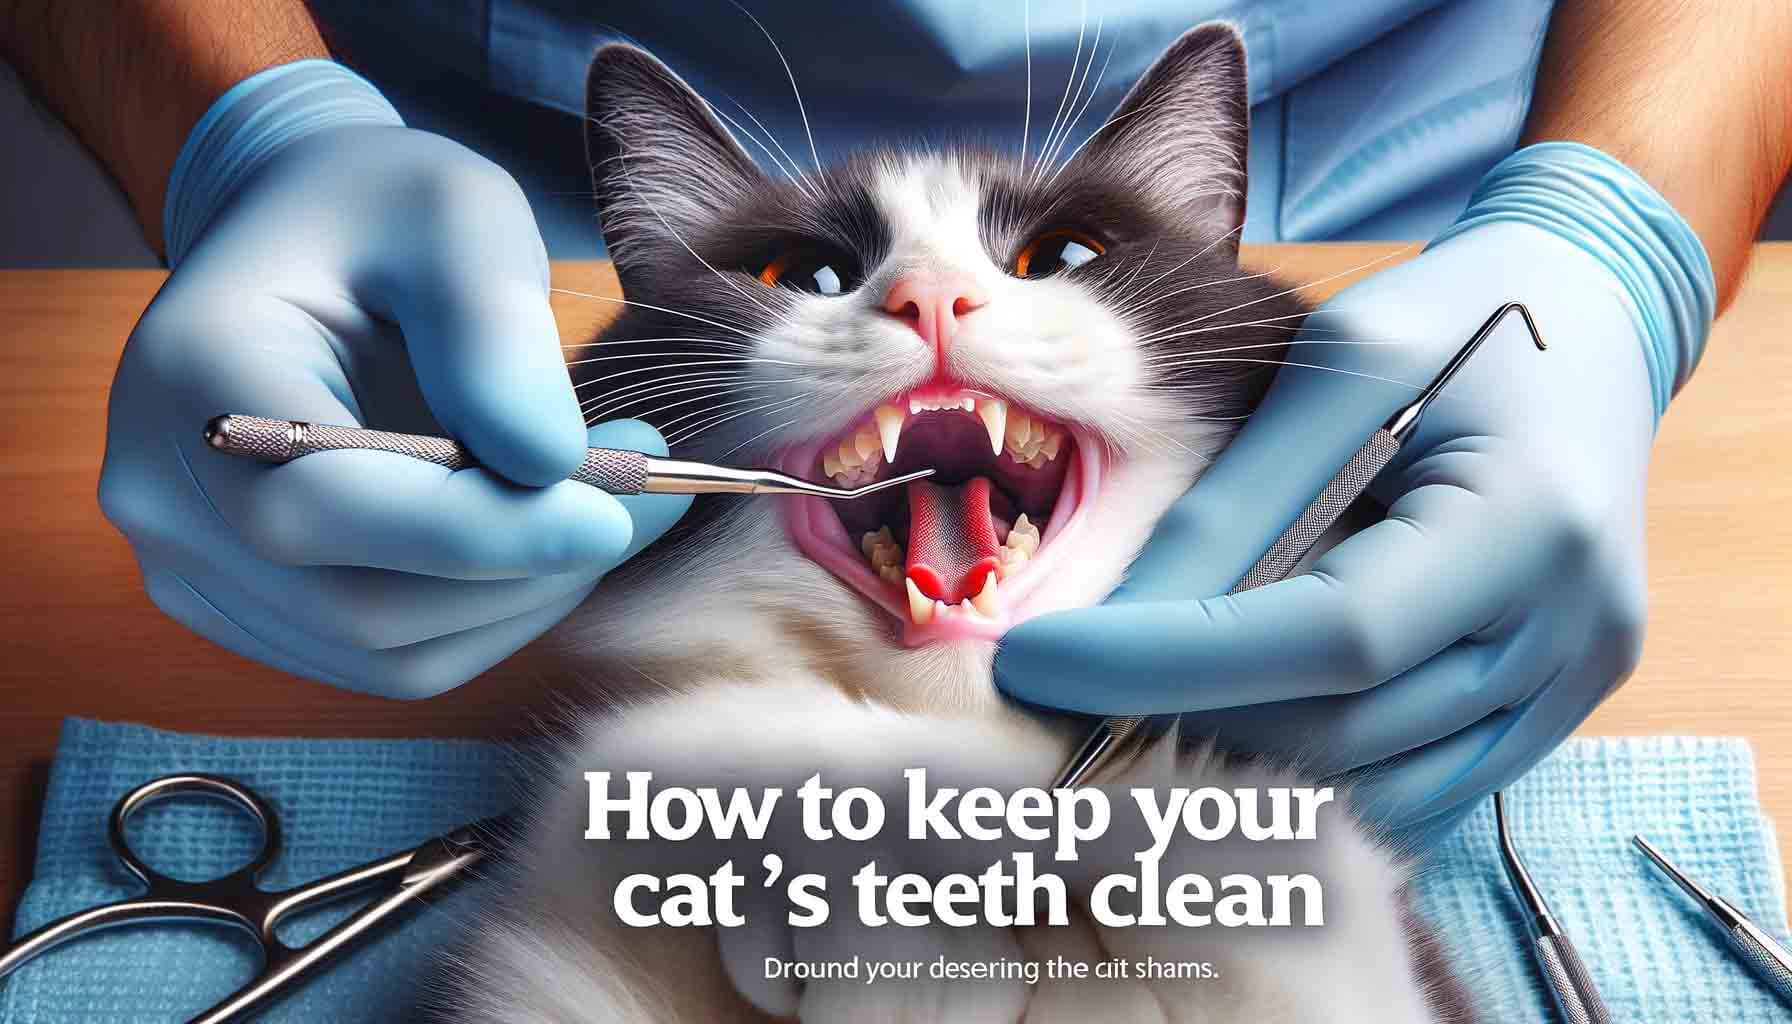 How to Keep Your Cat’s Teeth Clean